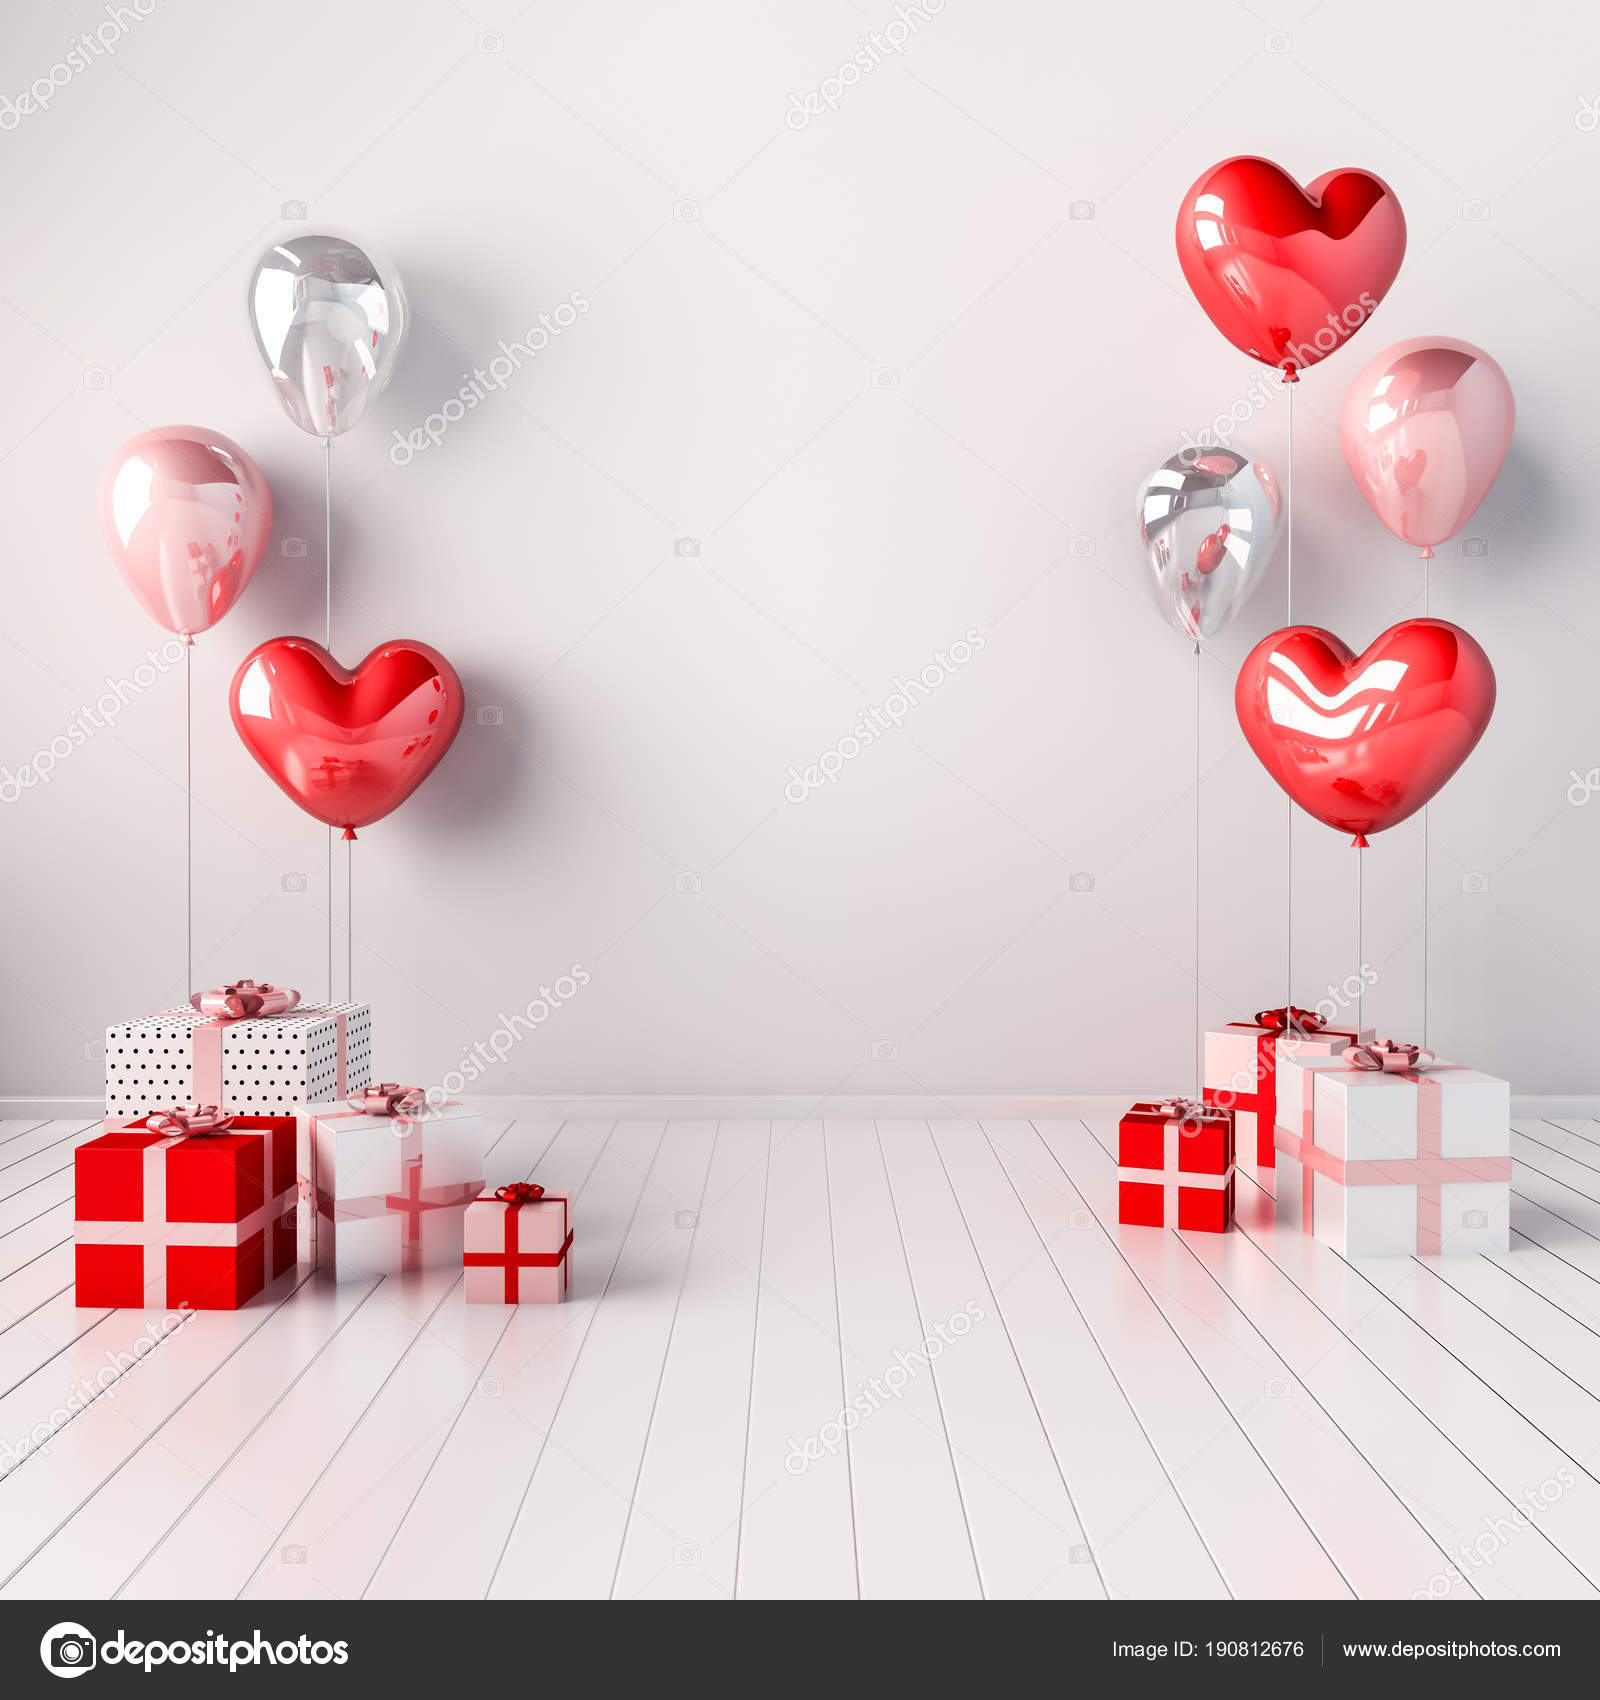 Rondsel hebben Pijnboom Interior Illustration Pink Red Heart Balloons Gift Boxes Glossy Composition  Stock Photo by ©anberization 190812676